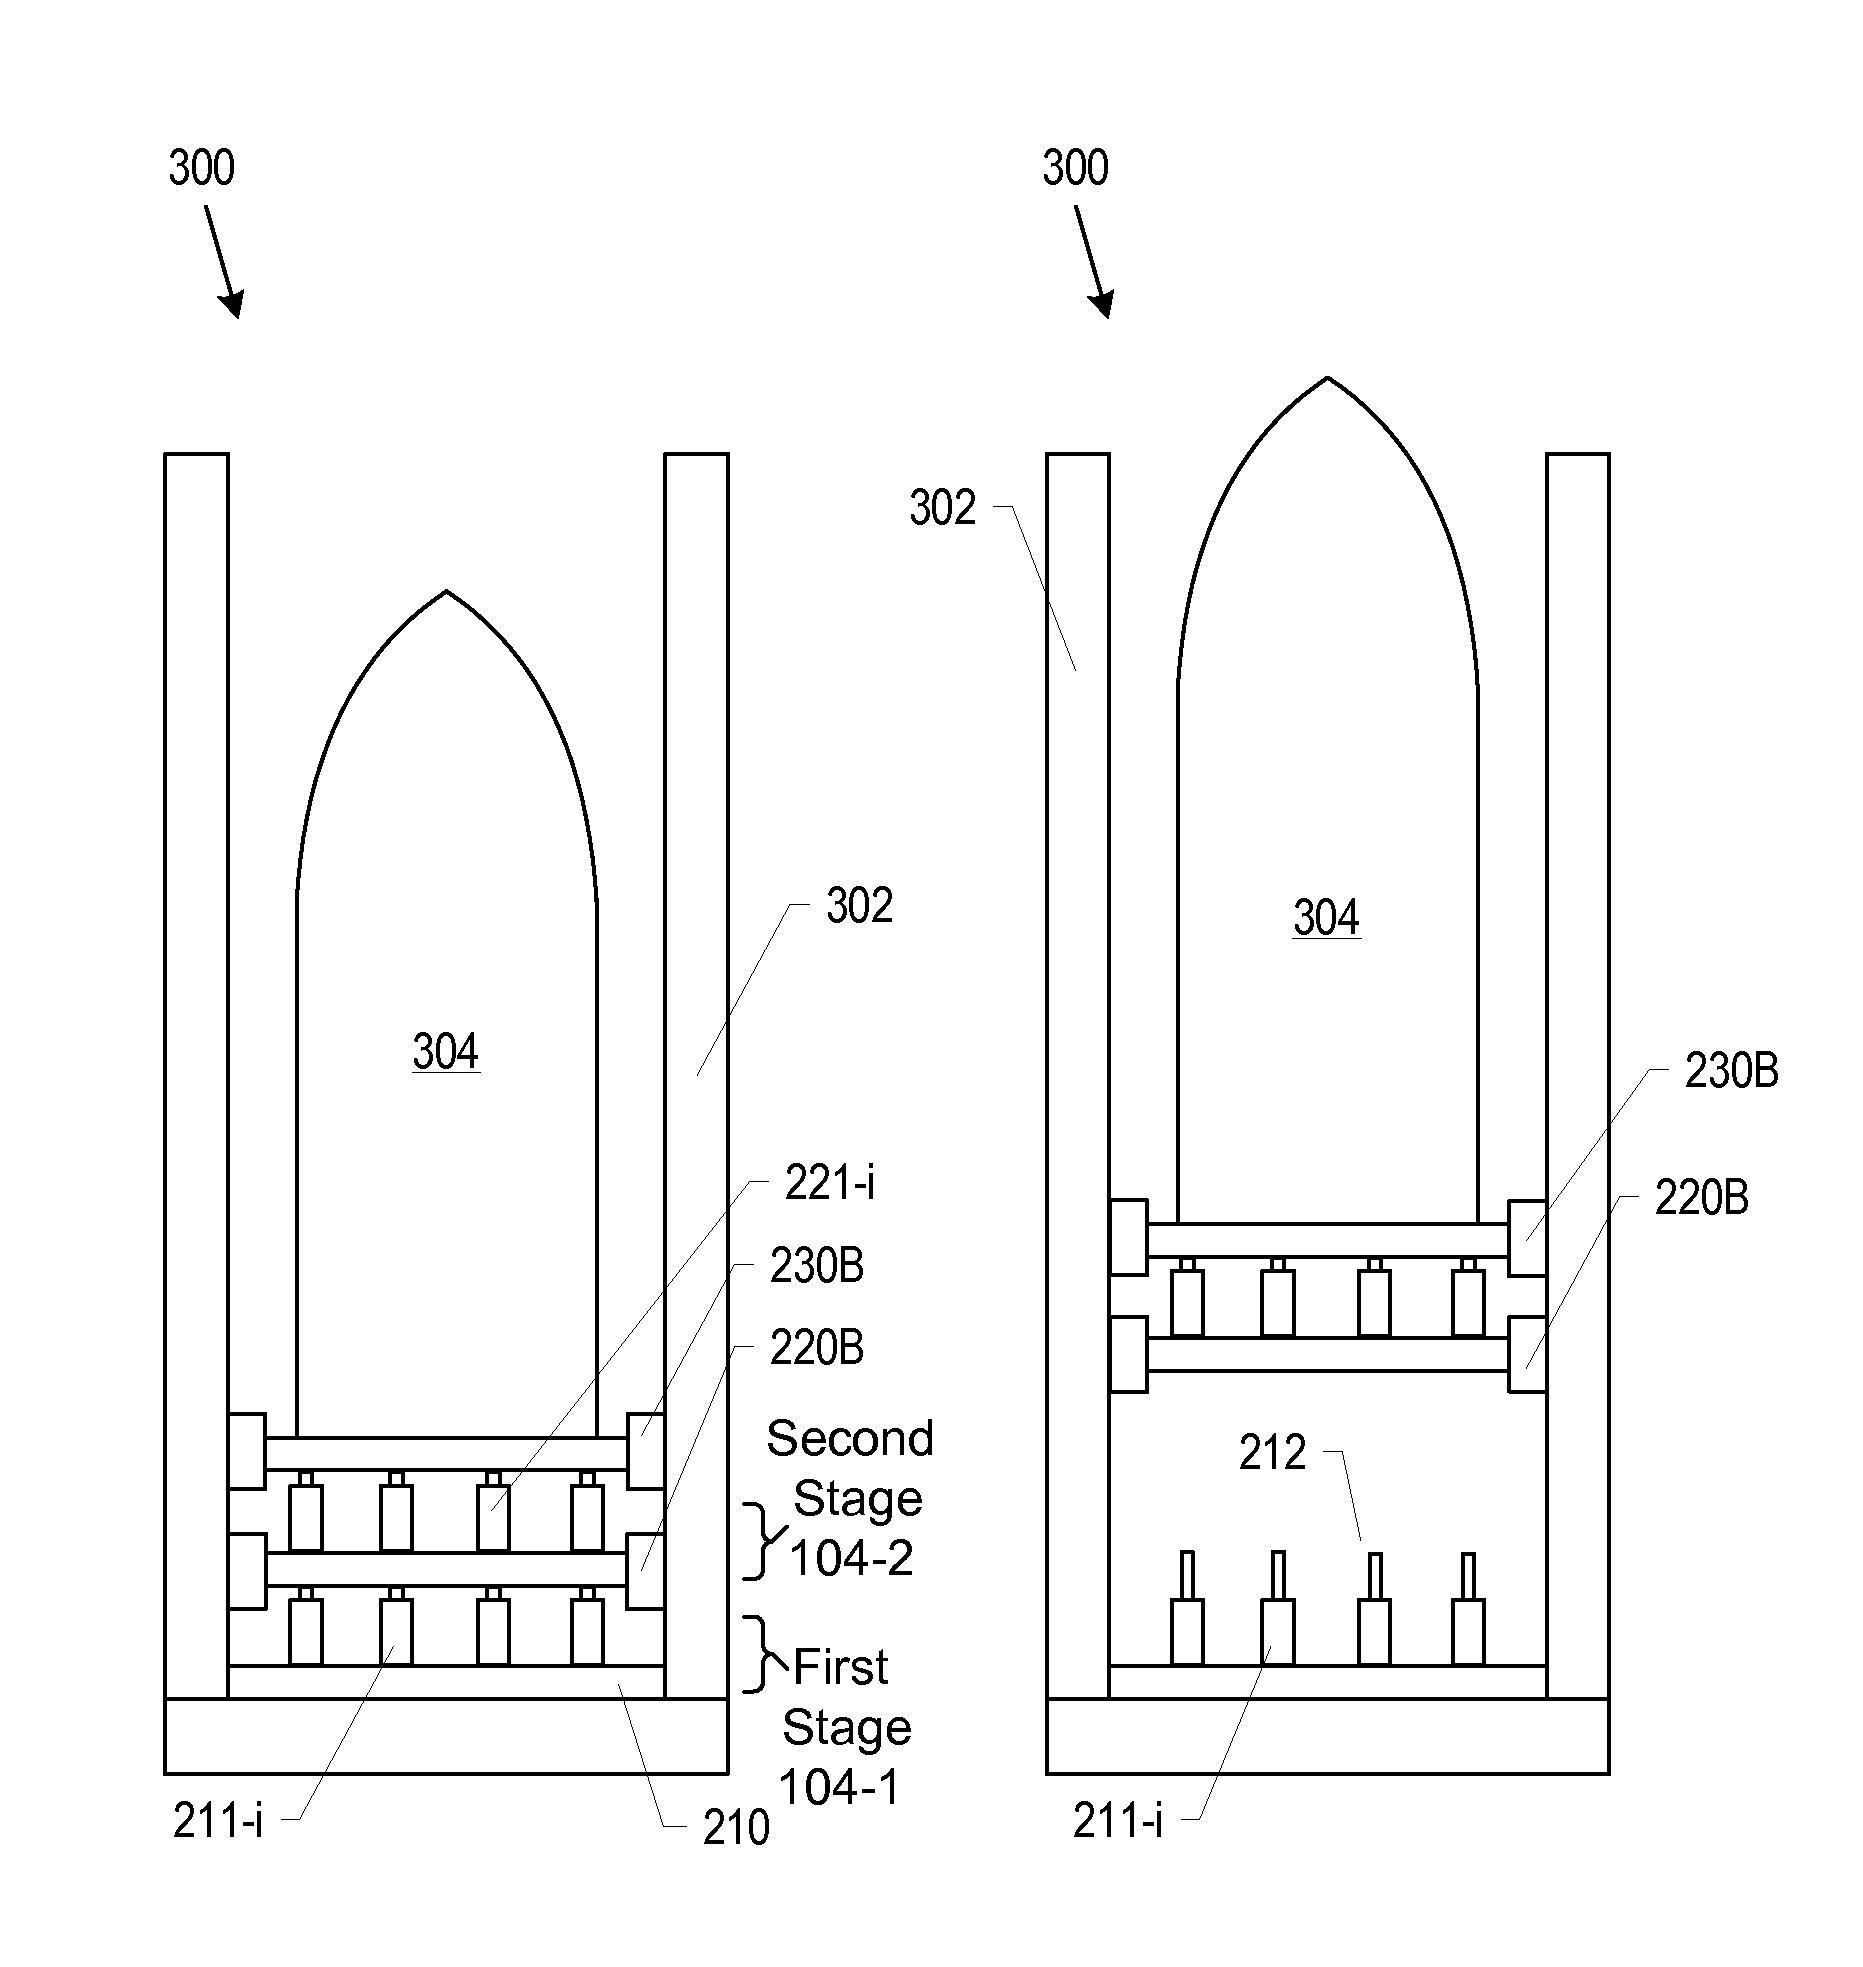 Cold launch system comprising shape-memory alloy actuator